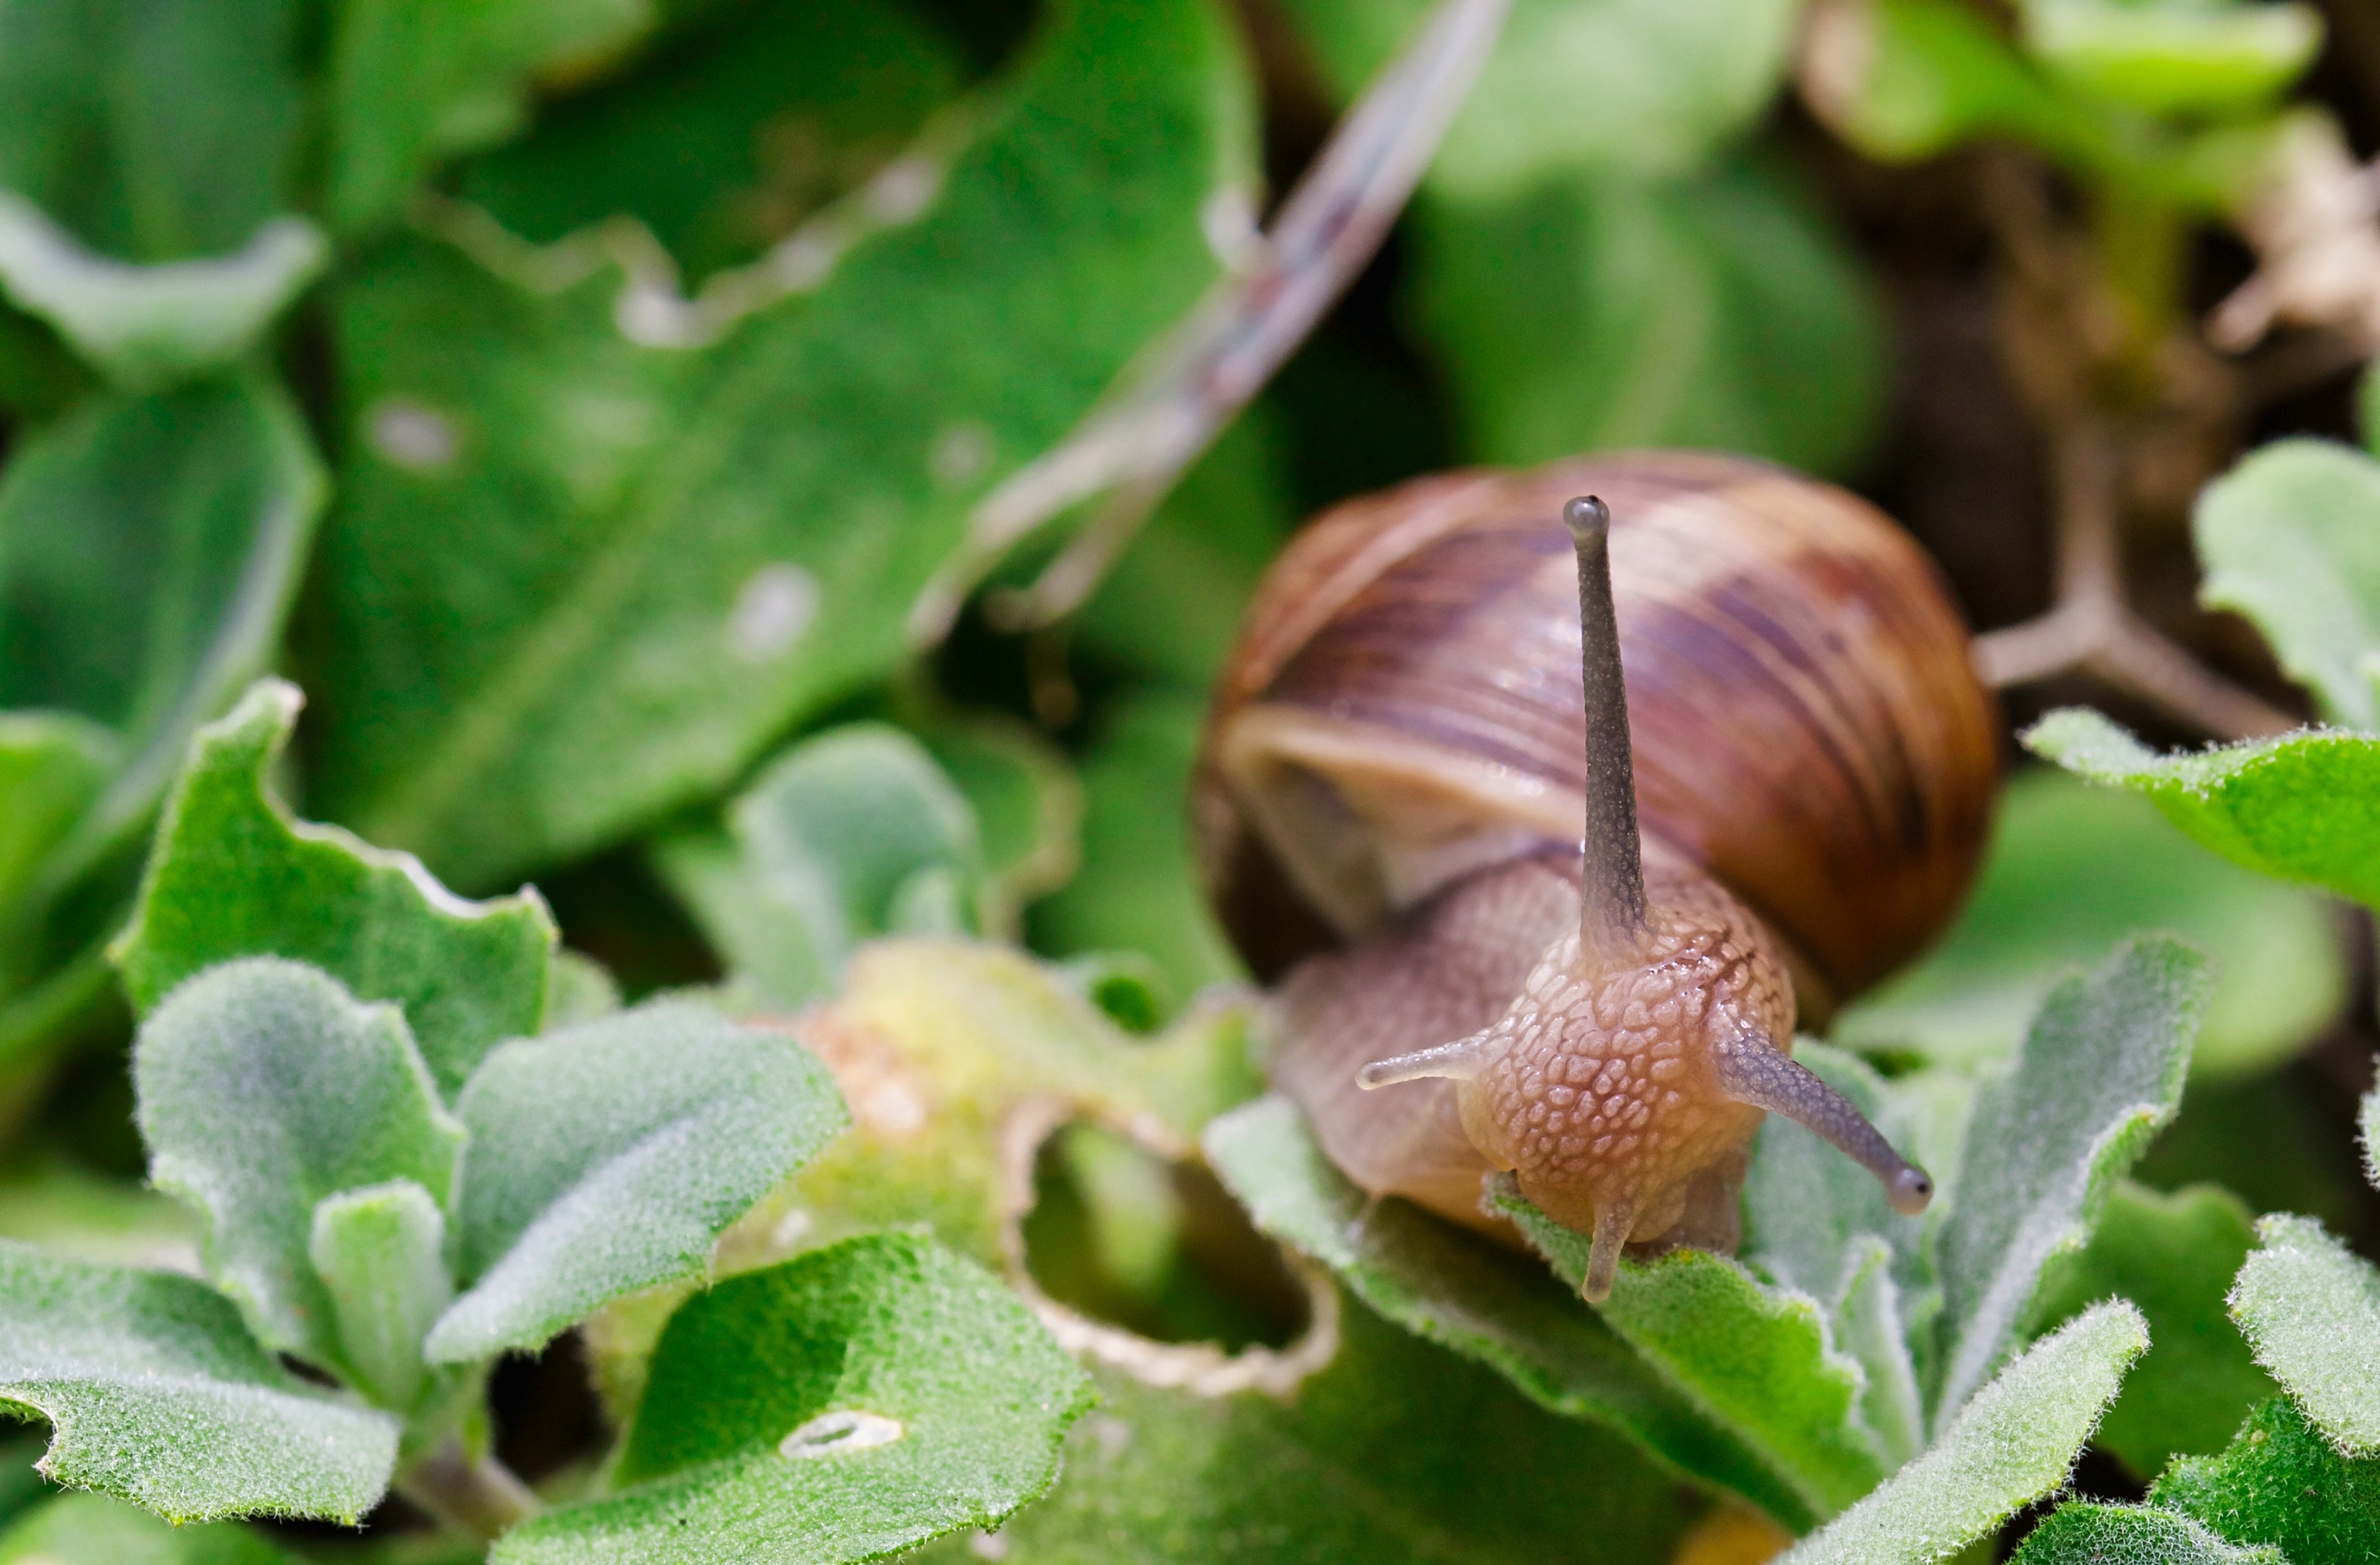 Snails Eating the Leaves